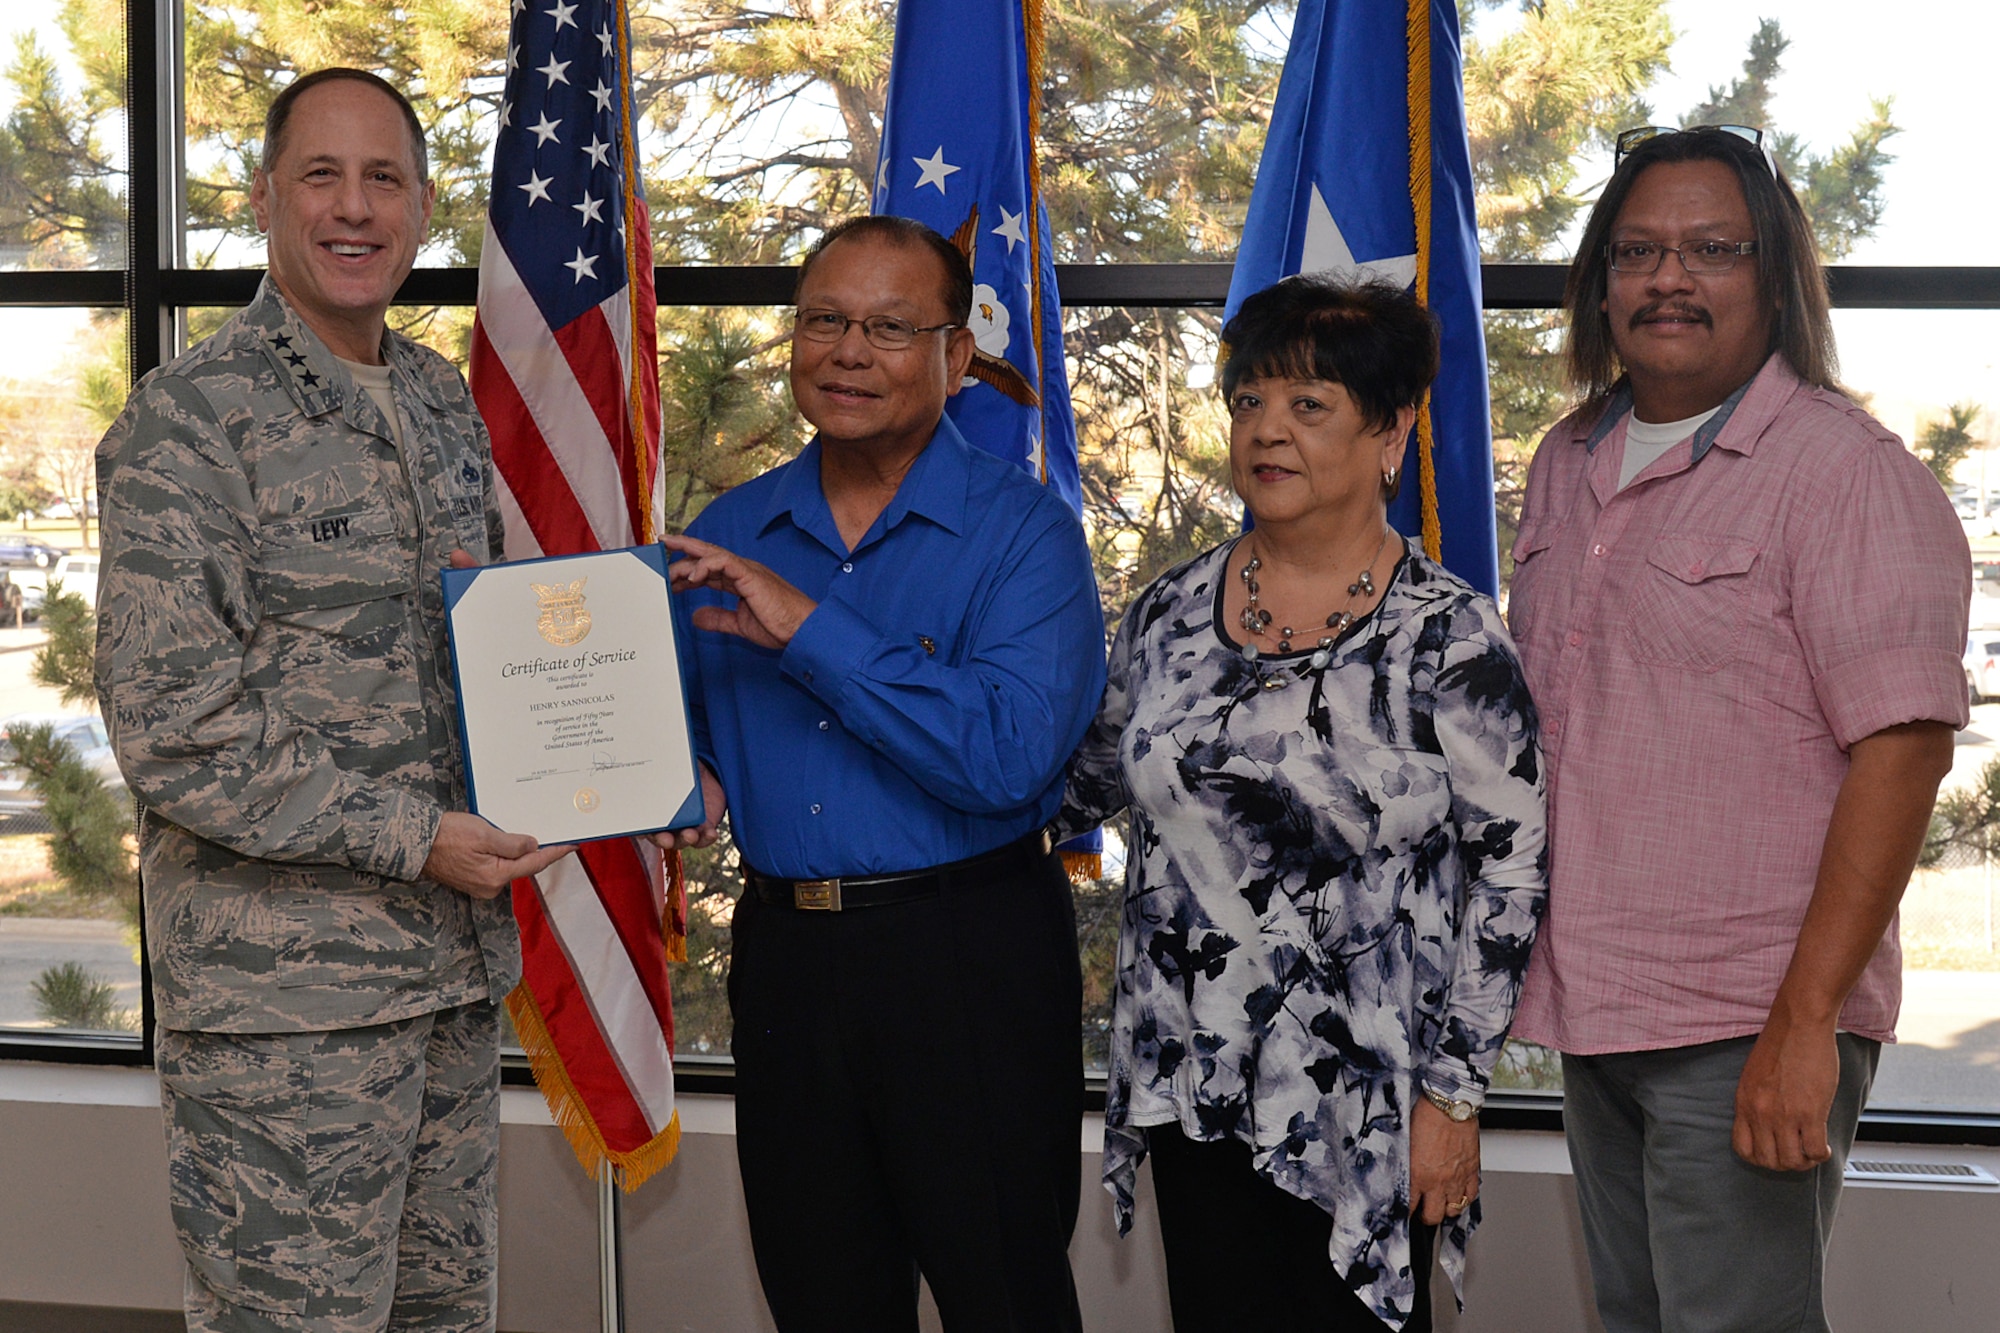 Lt. Gen. Lee K Levy II, Air Force Sustainment Center commander, presents Henry San Nicolas his 50-year service certificate, while his wife Dorothy and son Christopher join him during the presentation on Nov. 2, 2017, at Hill Air Force Base, Utah. (U.S. Air Force Photo by Alex R. Lloyd)